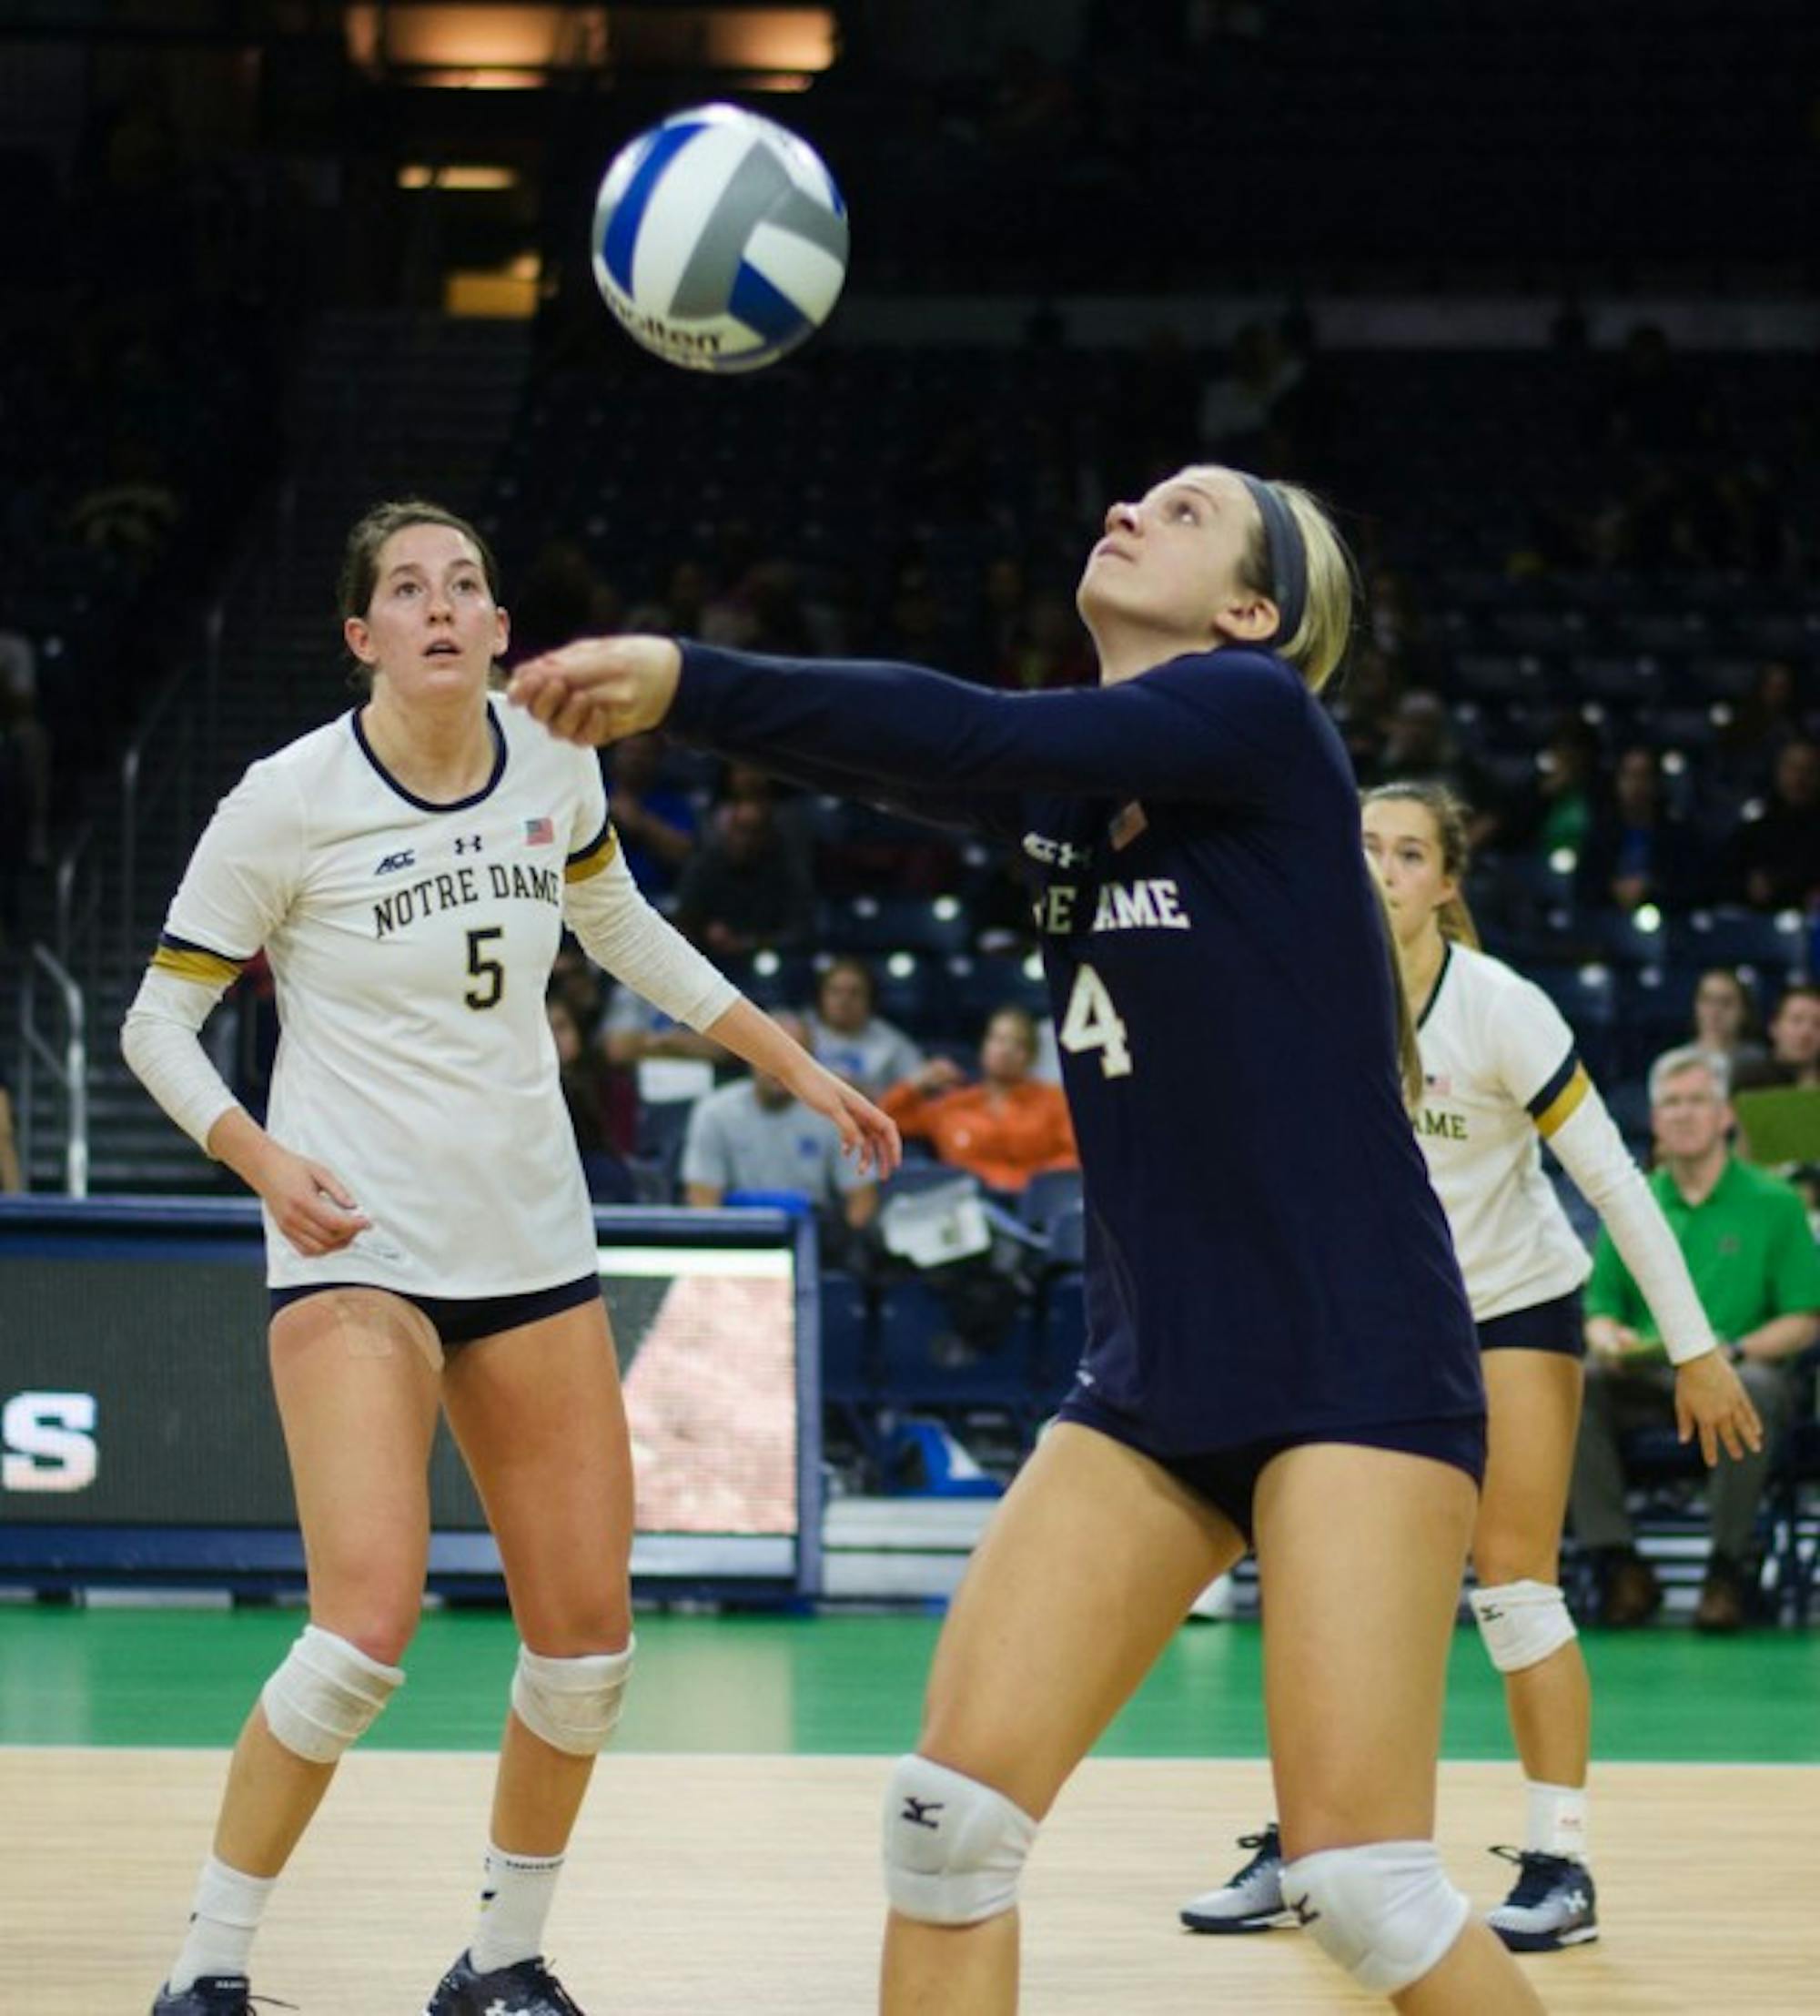 Irish sophomore libero Ryann DeJarld sets the ball during Notre Dame's 3-1 victory over Duke on Sept. 30 at Purcell Pavilion.